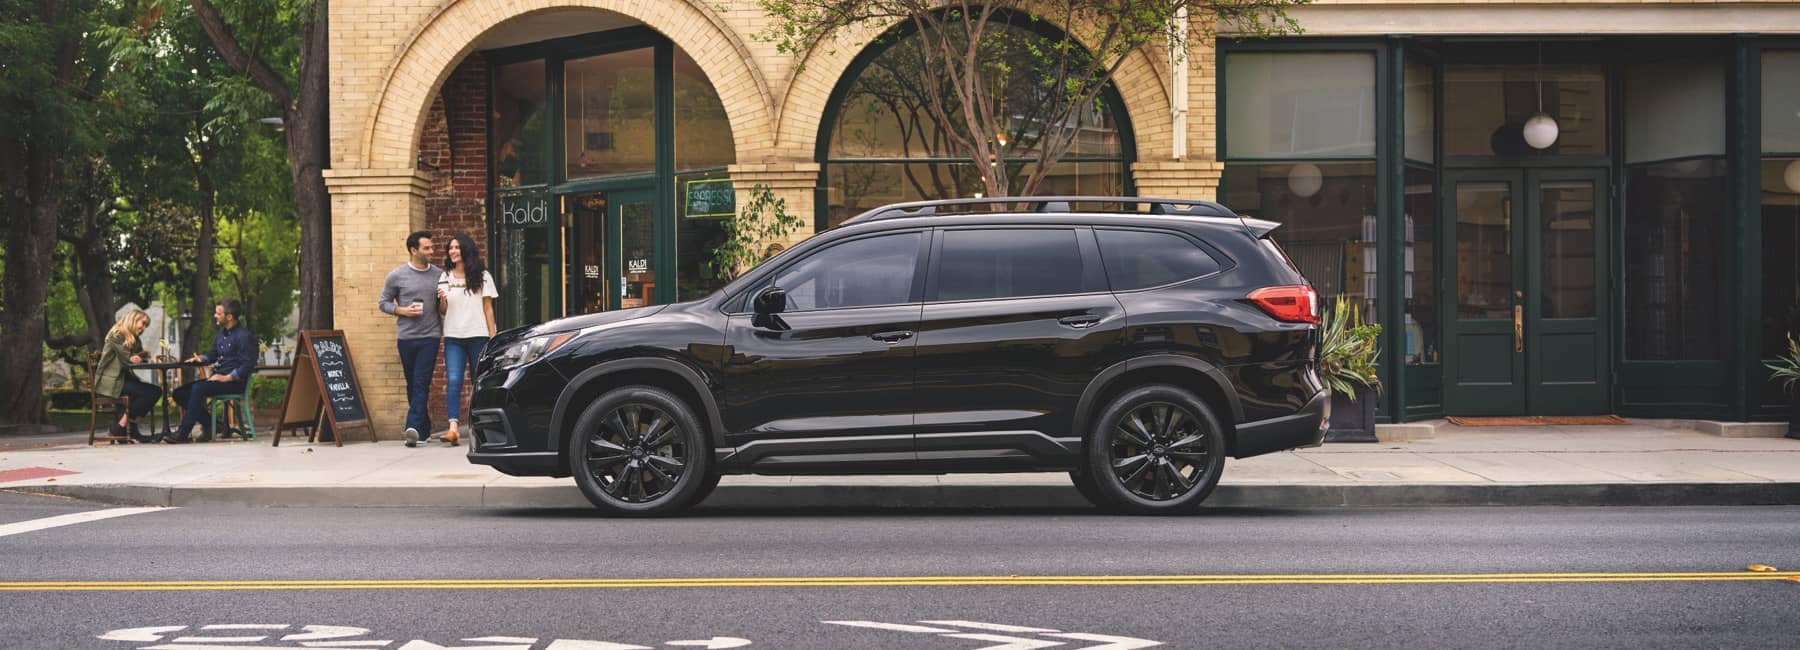 2022 Subaru Ascent parked in front of a trendy brick building